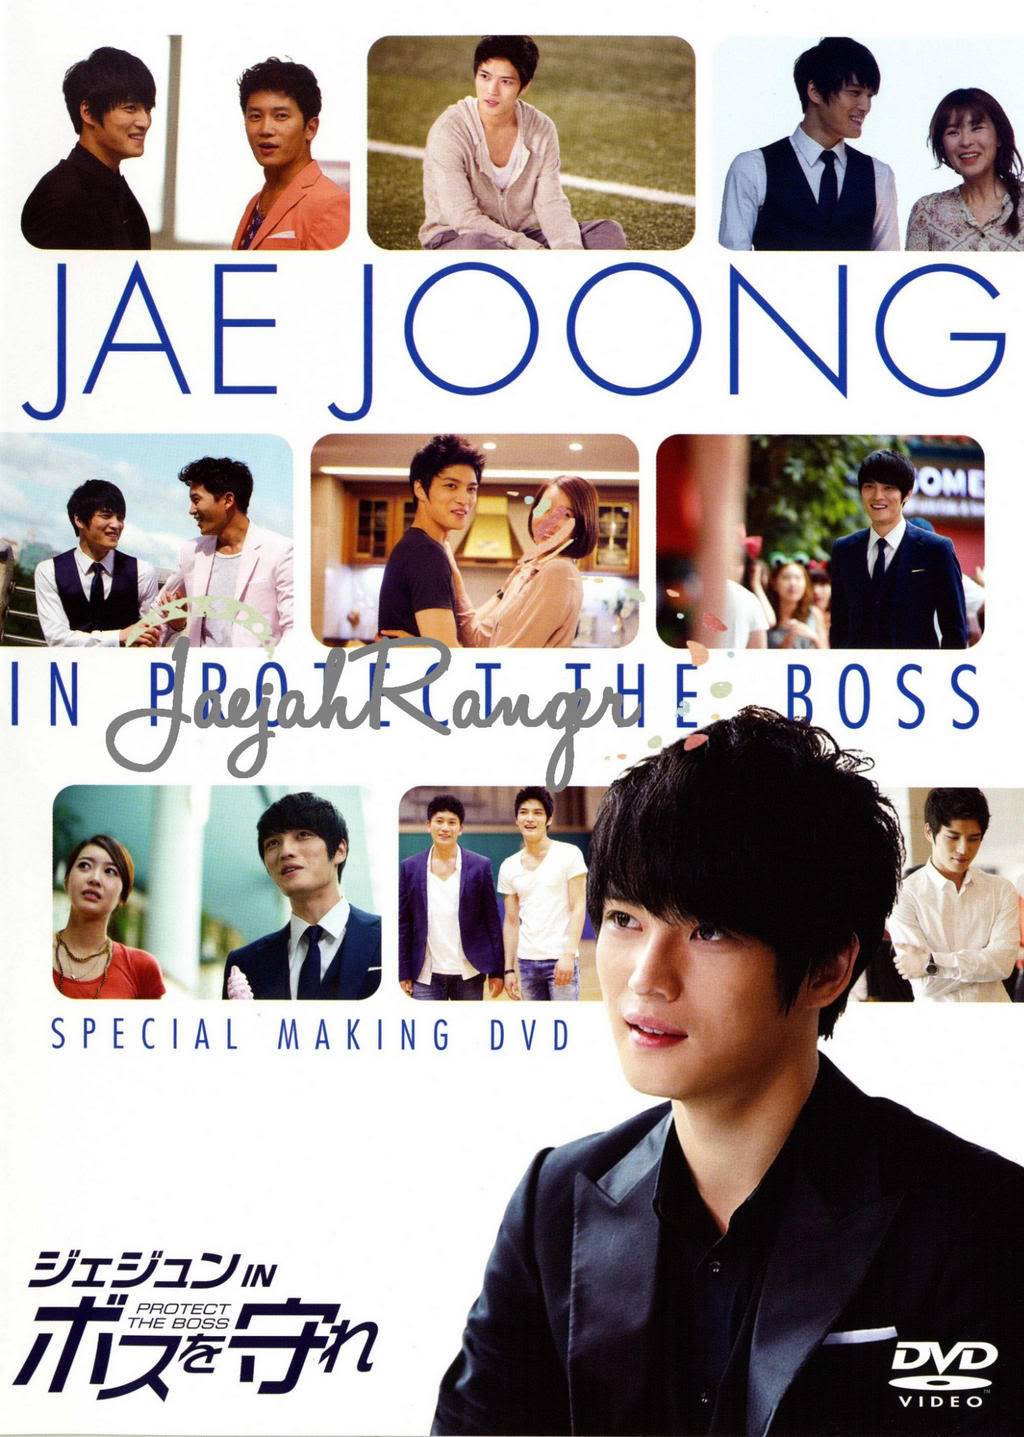 [02.12.12][Scans] Jaejoong - Protect the Boss Special DVD Booklet A89b6OdCUAAQgpI